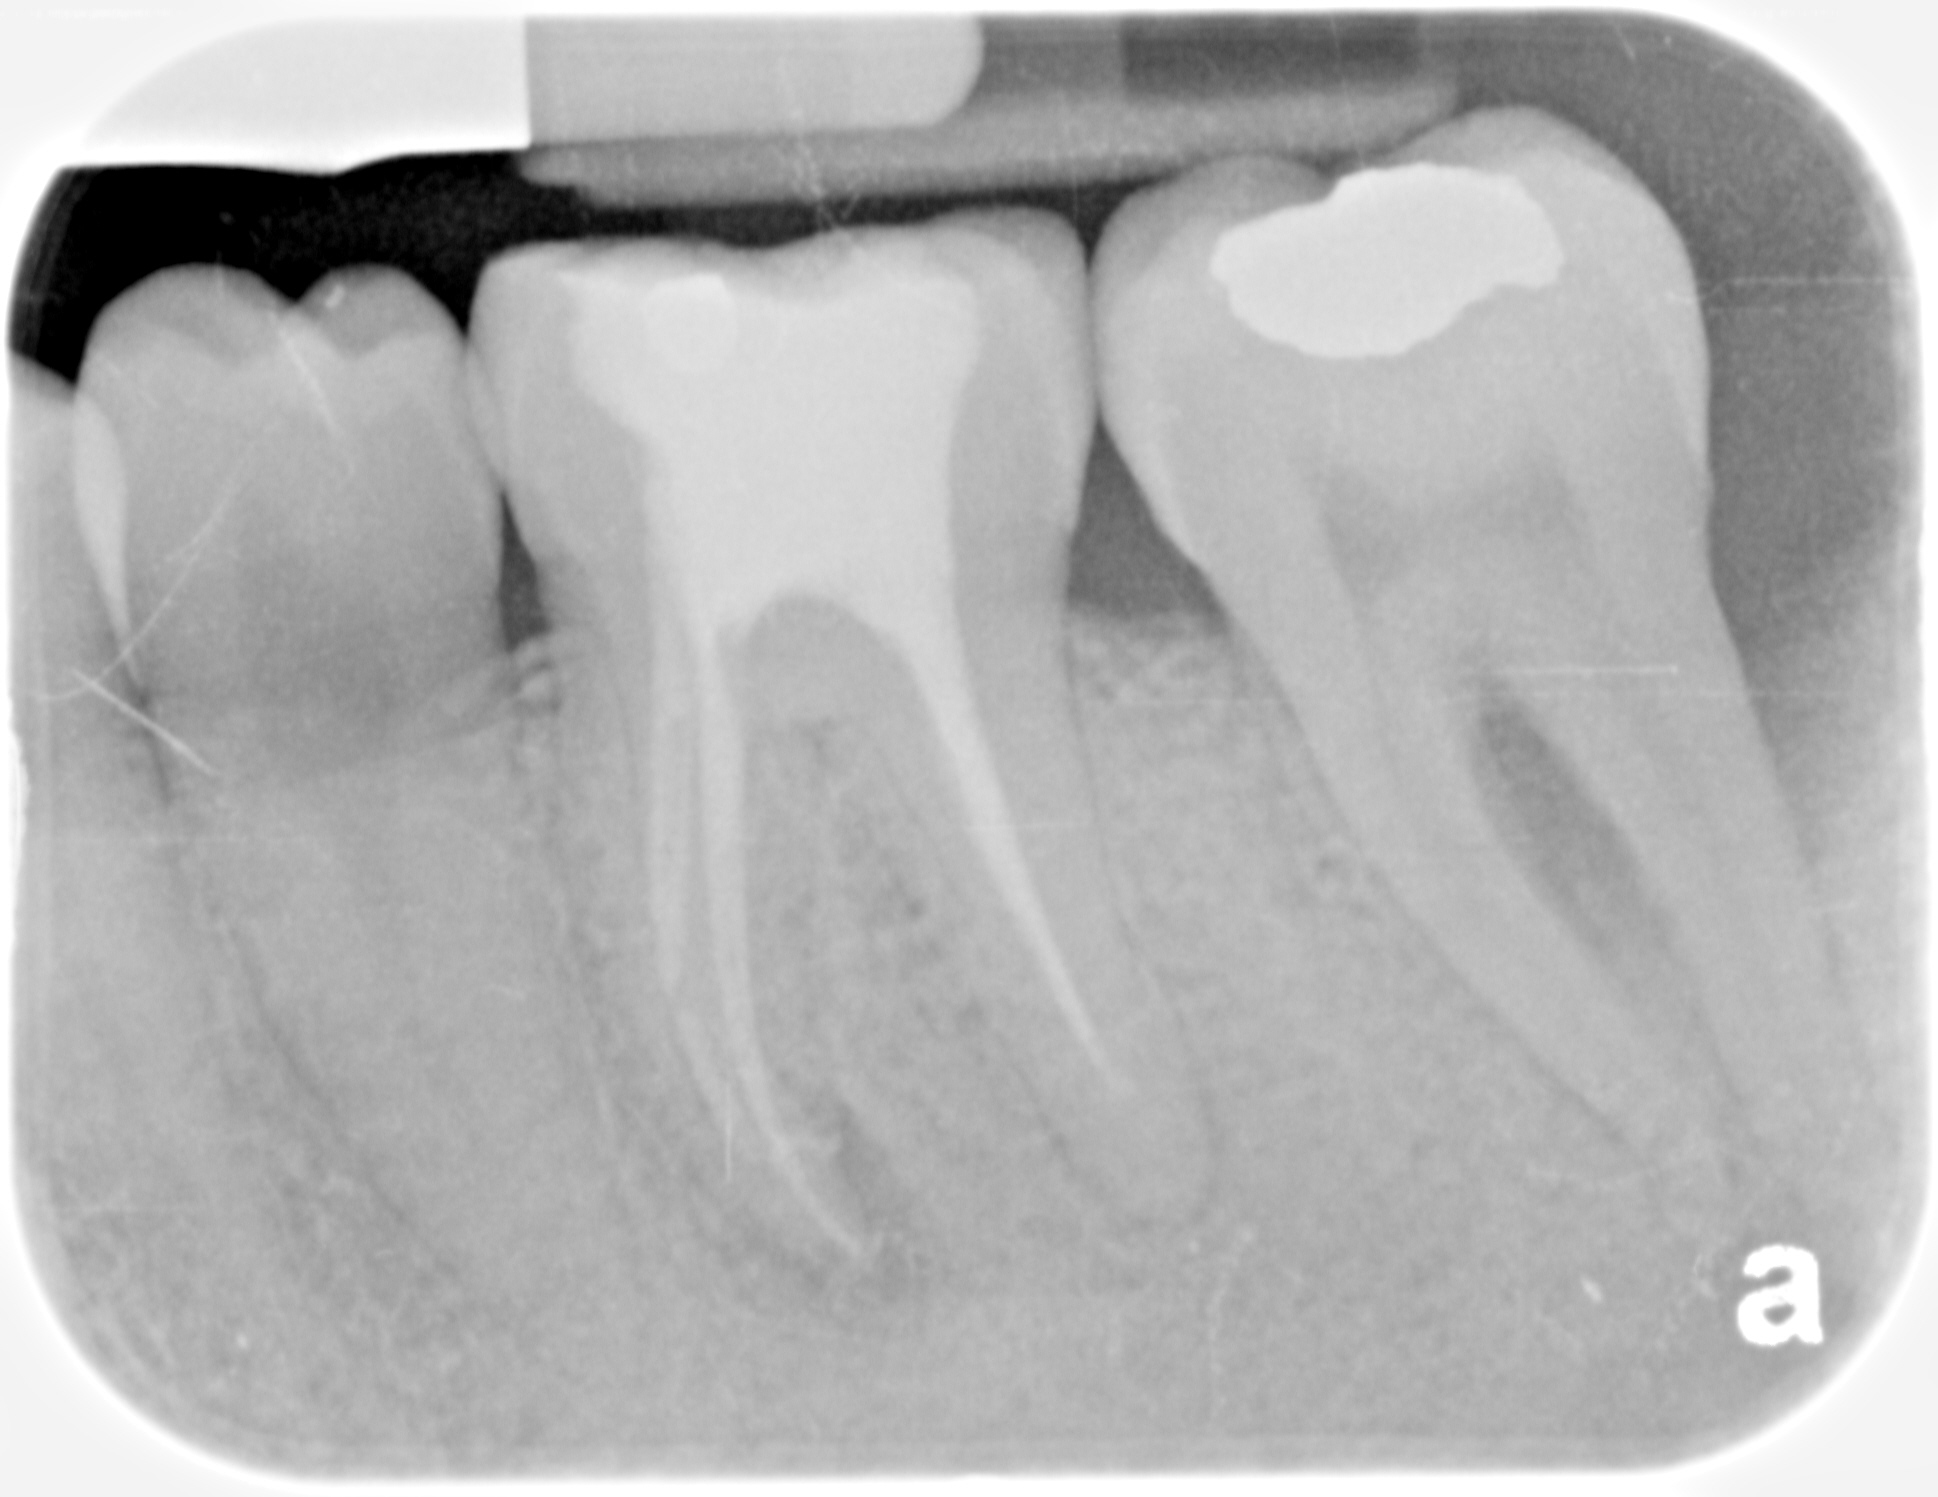 Bone in furcation after LANAP, bone growth, Louisville Laser and Cosmetic Dentistry